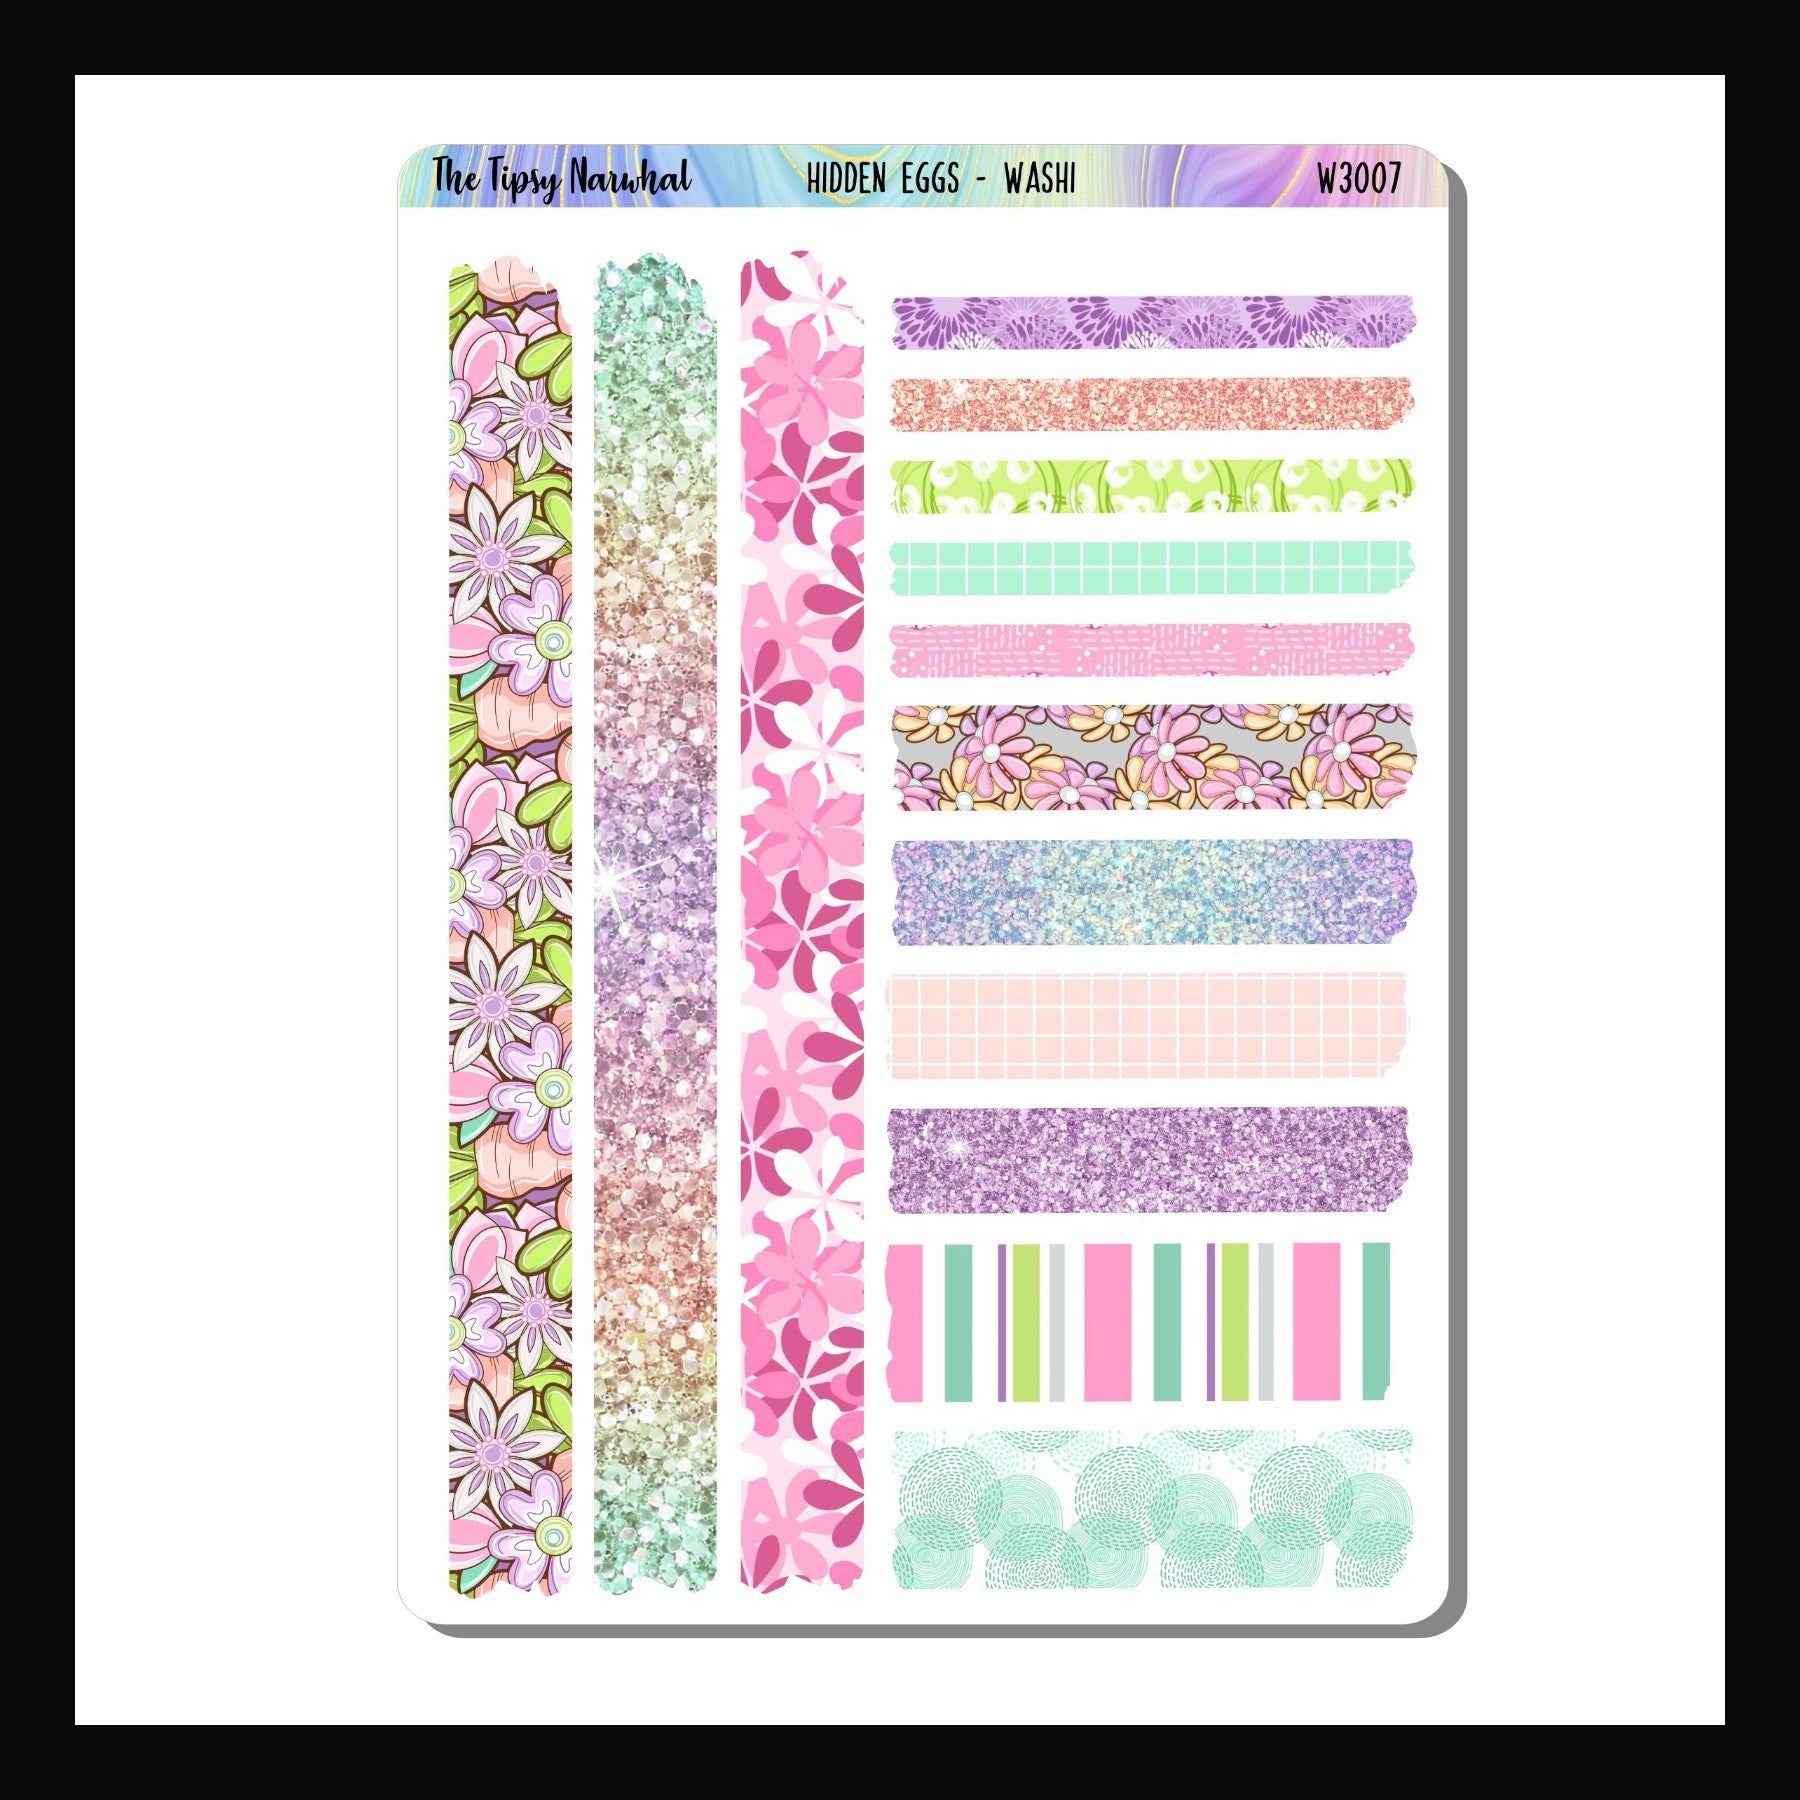 Hidden Eggs Hobonichi Cousin Washi Sheet.  The washi sticker sheet features numerous washi sticker strips of various shapes and sizes.  All designs coordinate with the Hidden Eggs Hobonichi Cousin Kit.